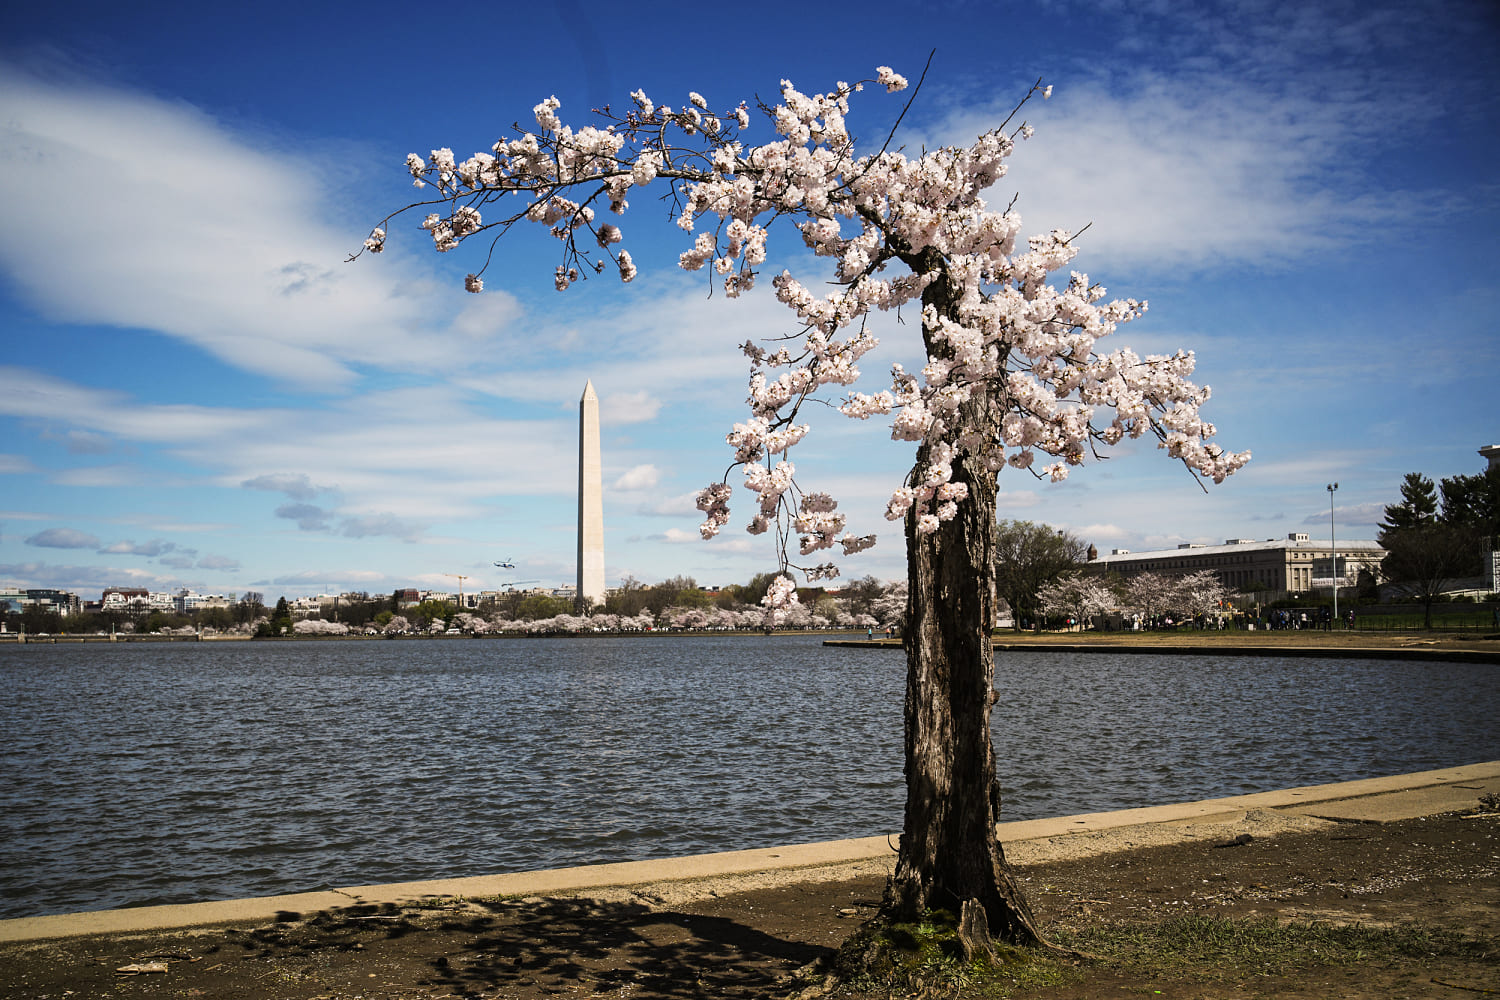 japan gifts 250 new cherry trees to d.c., replacing those to be removed for repairs